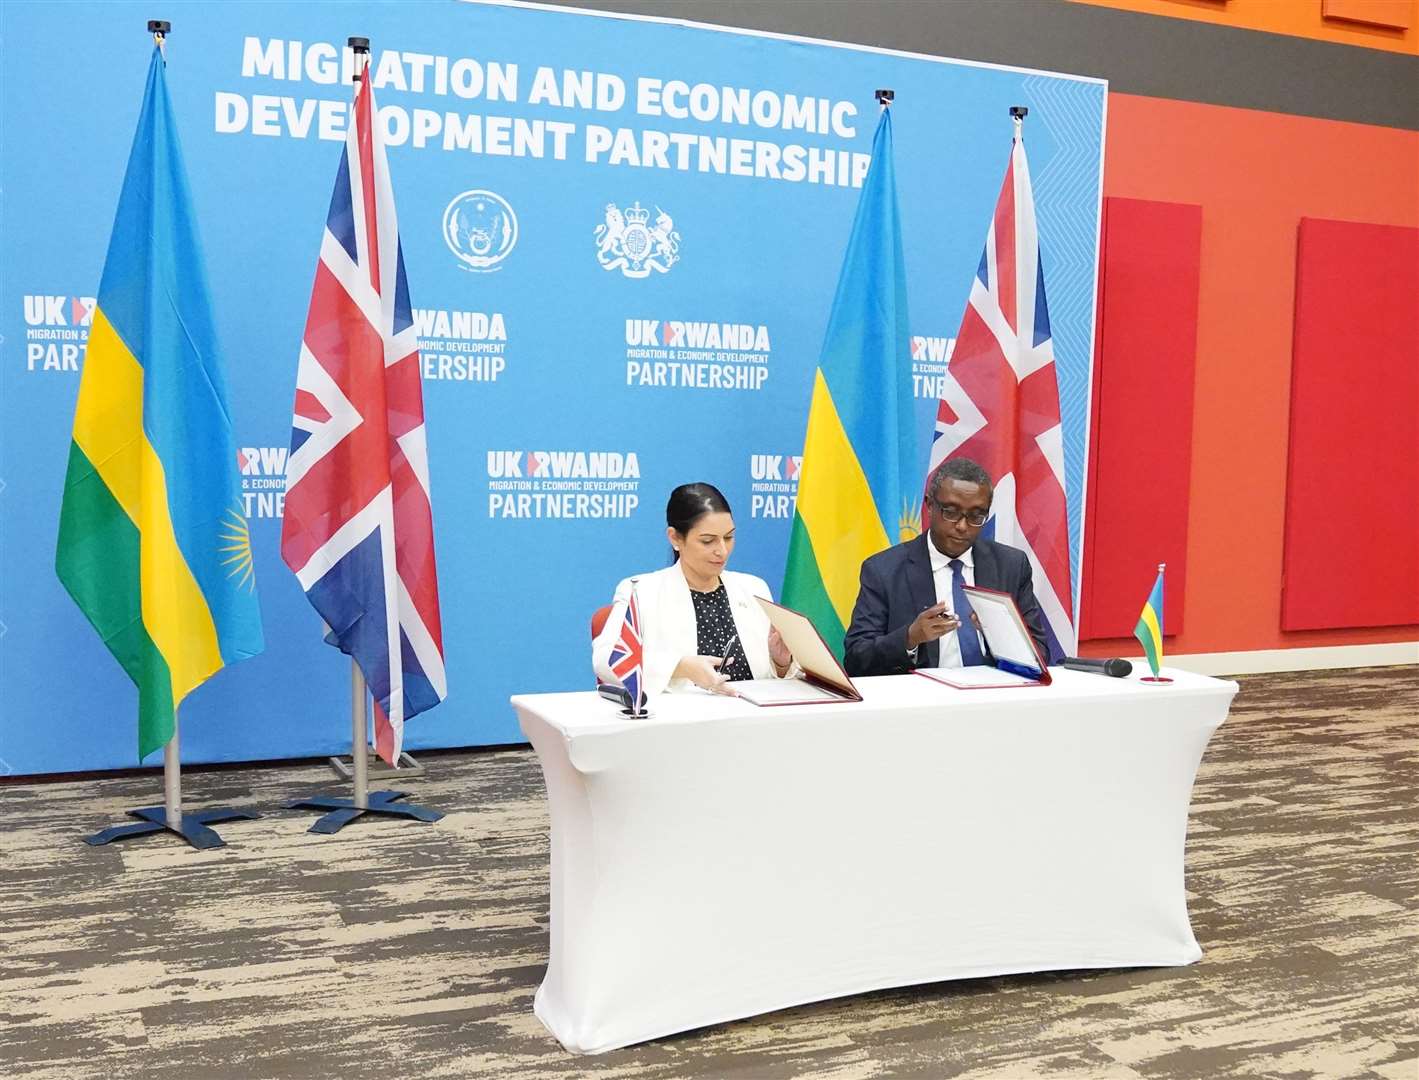 Home Secretary Priti Patel and Rwandan minister for foreign affairs Vincent Biruta signed the deal in April (Flora Thompson/PA)